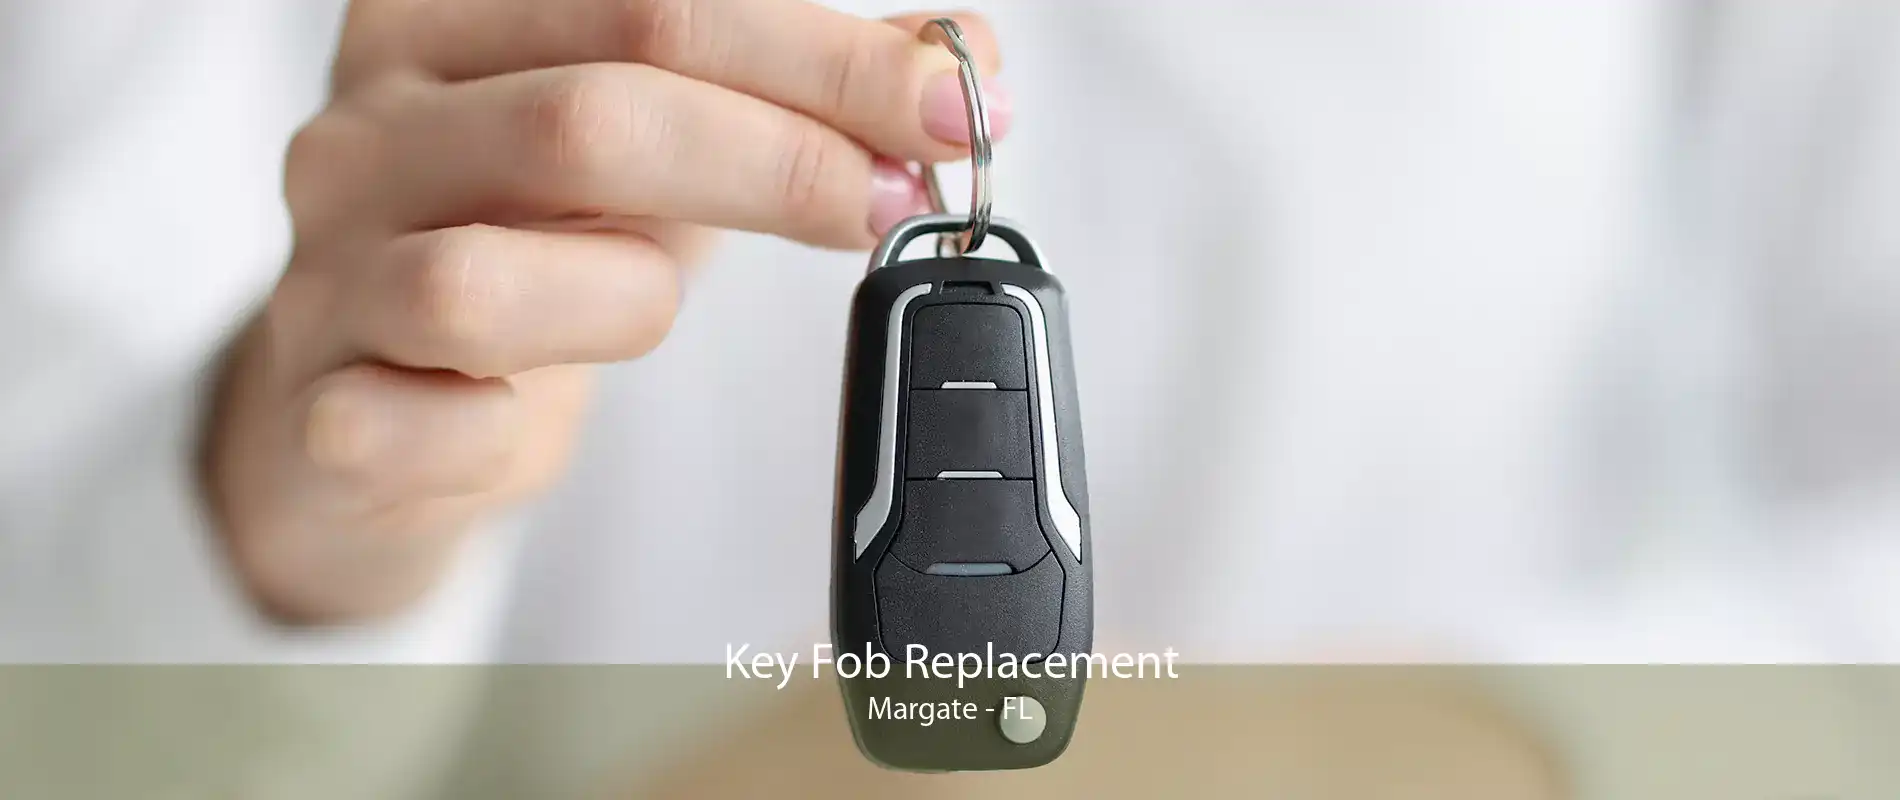 Key Fob Replacement Margate - FL